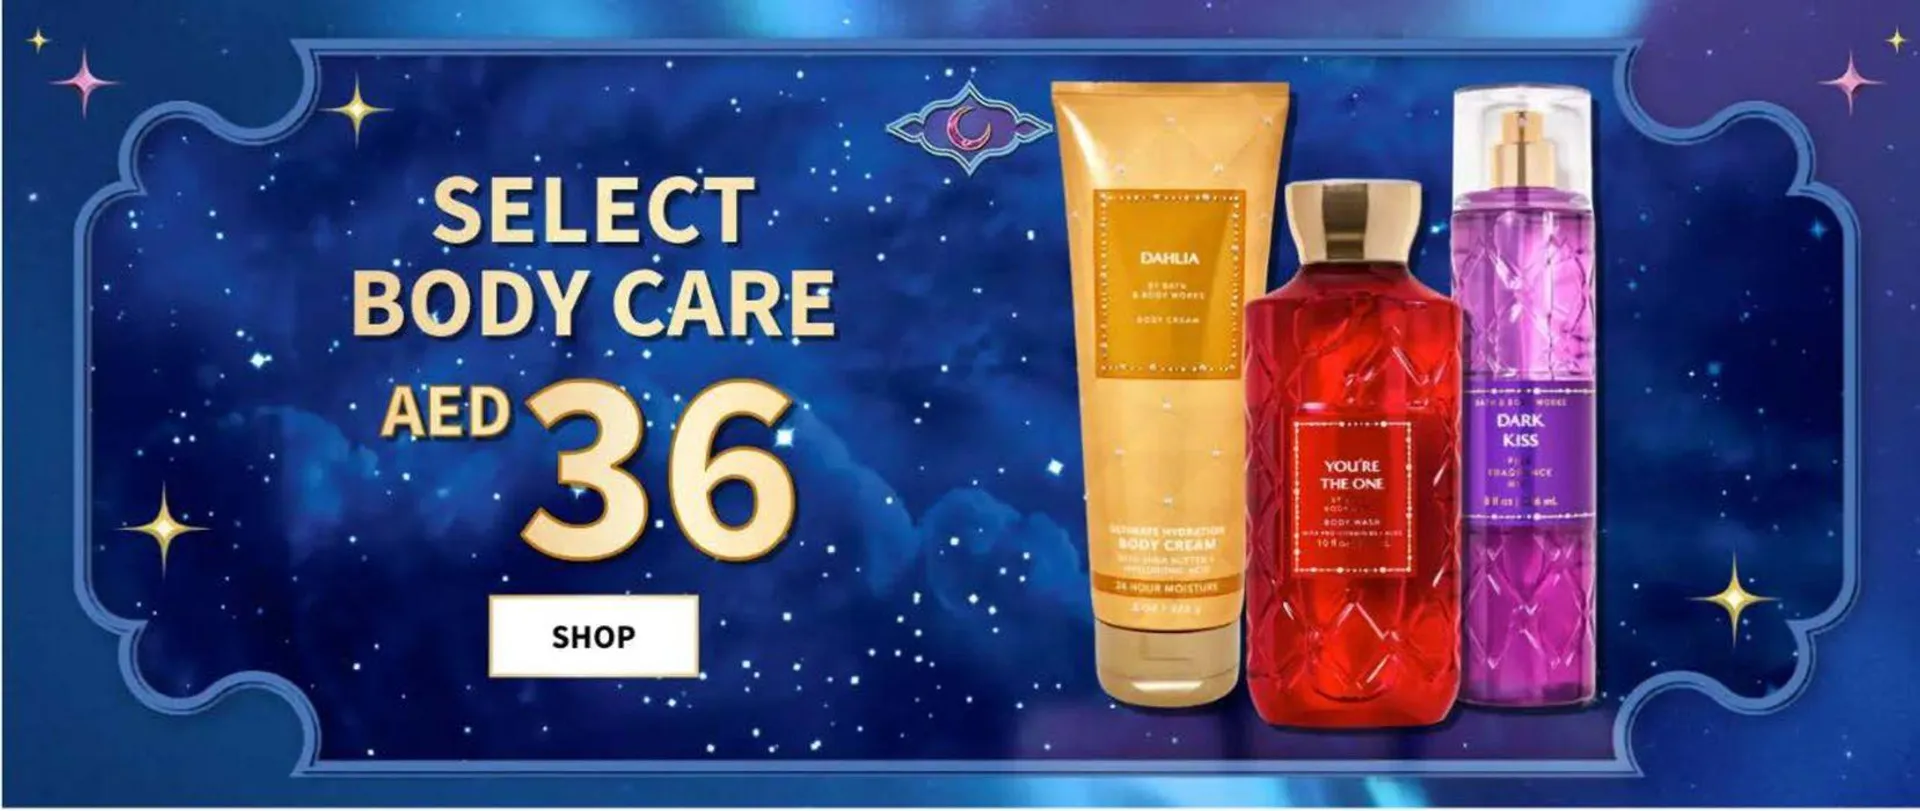 Select Body Care AED 36 - 1